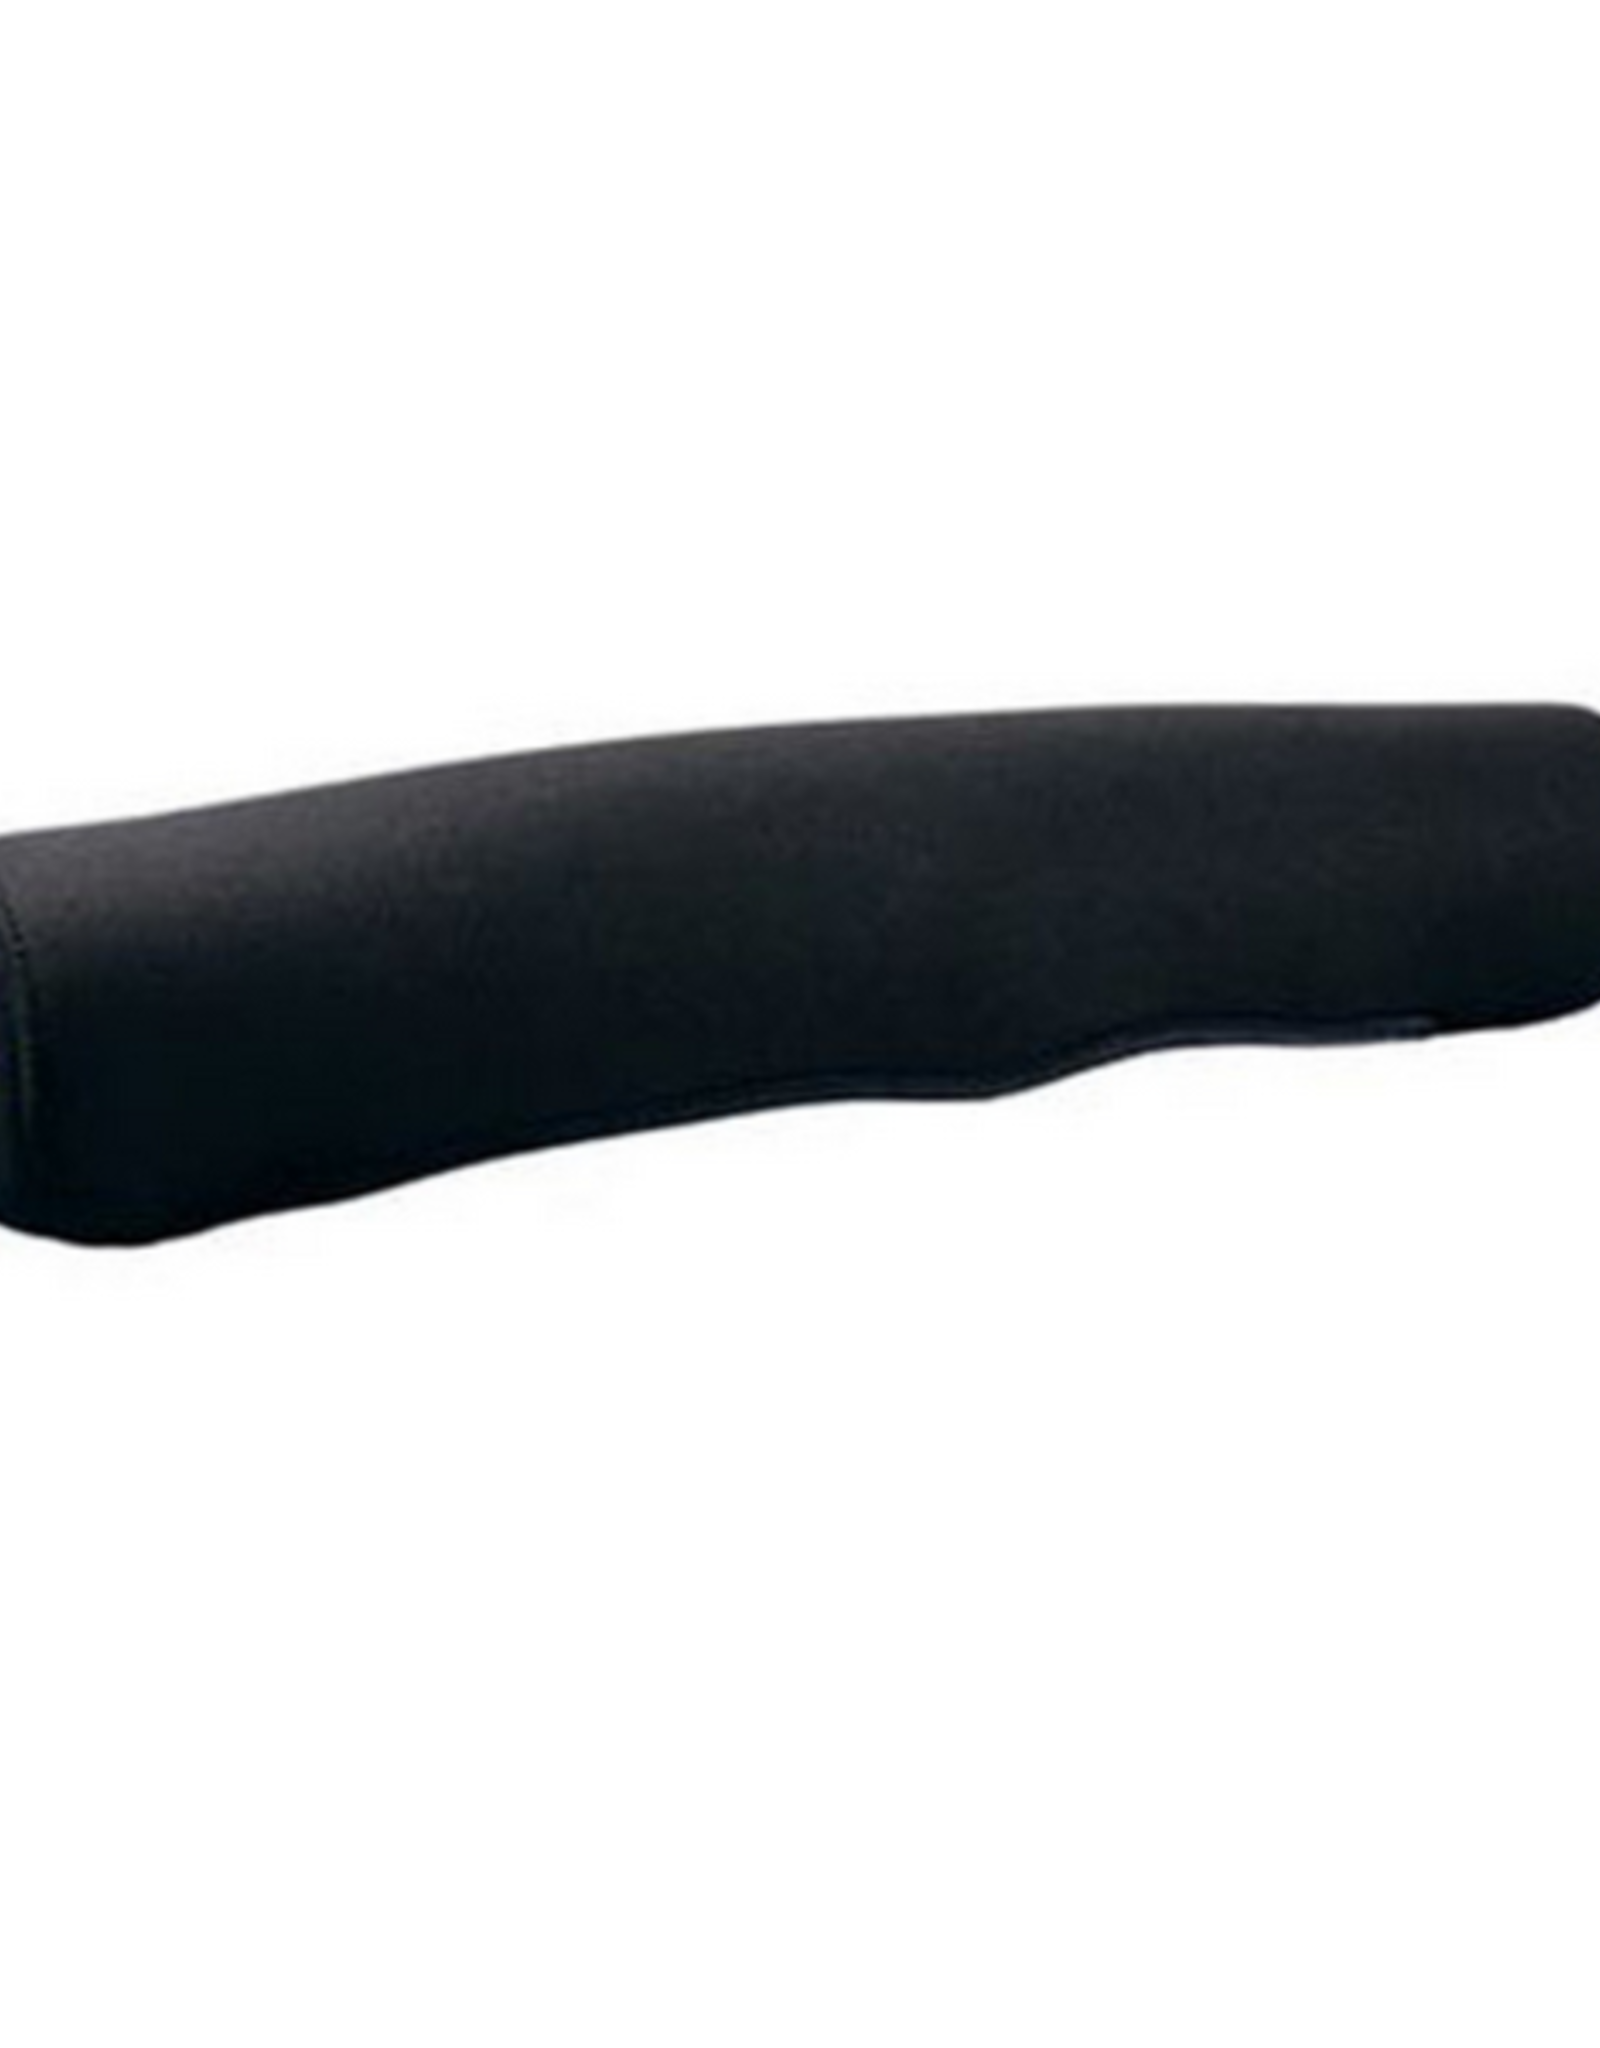 Zeiss Soft Rifle Scope Cover